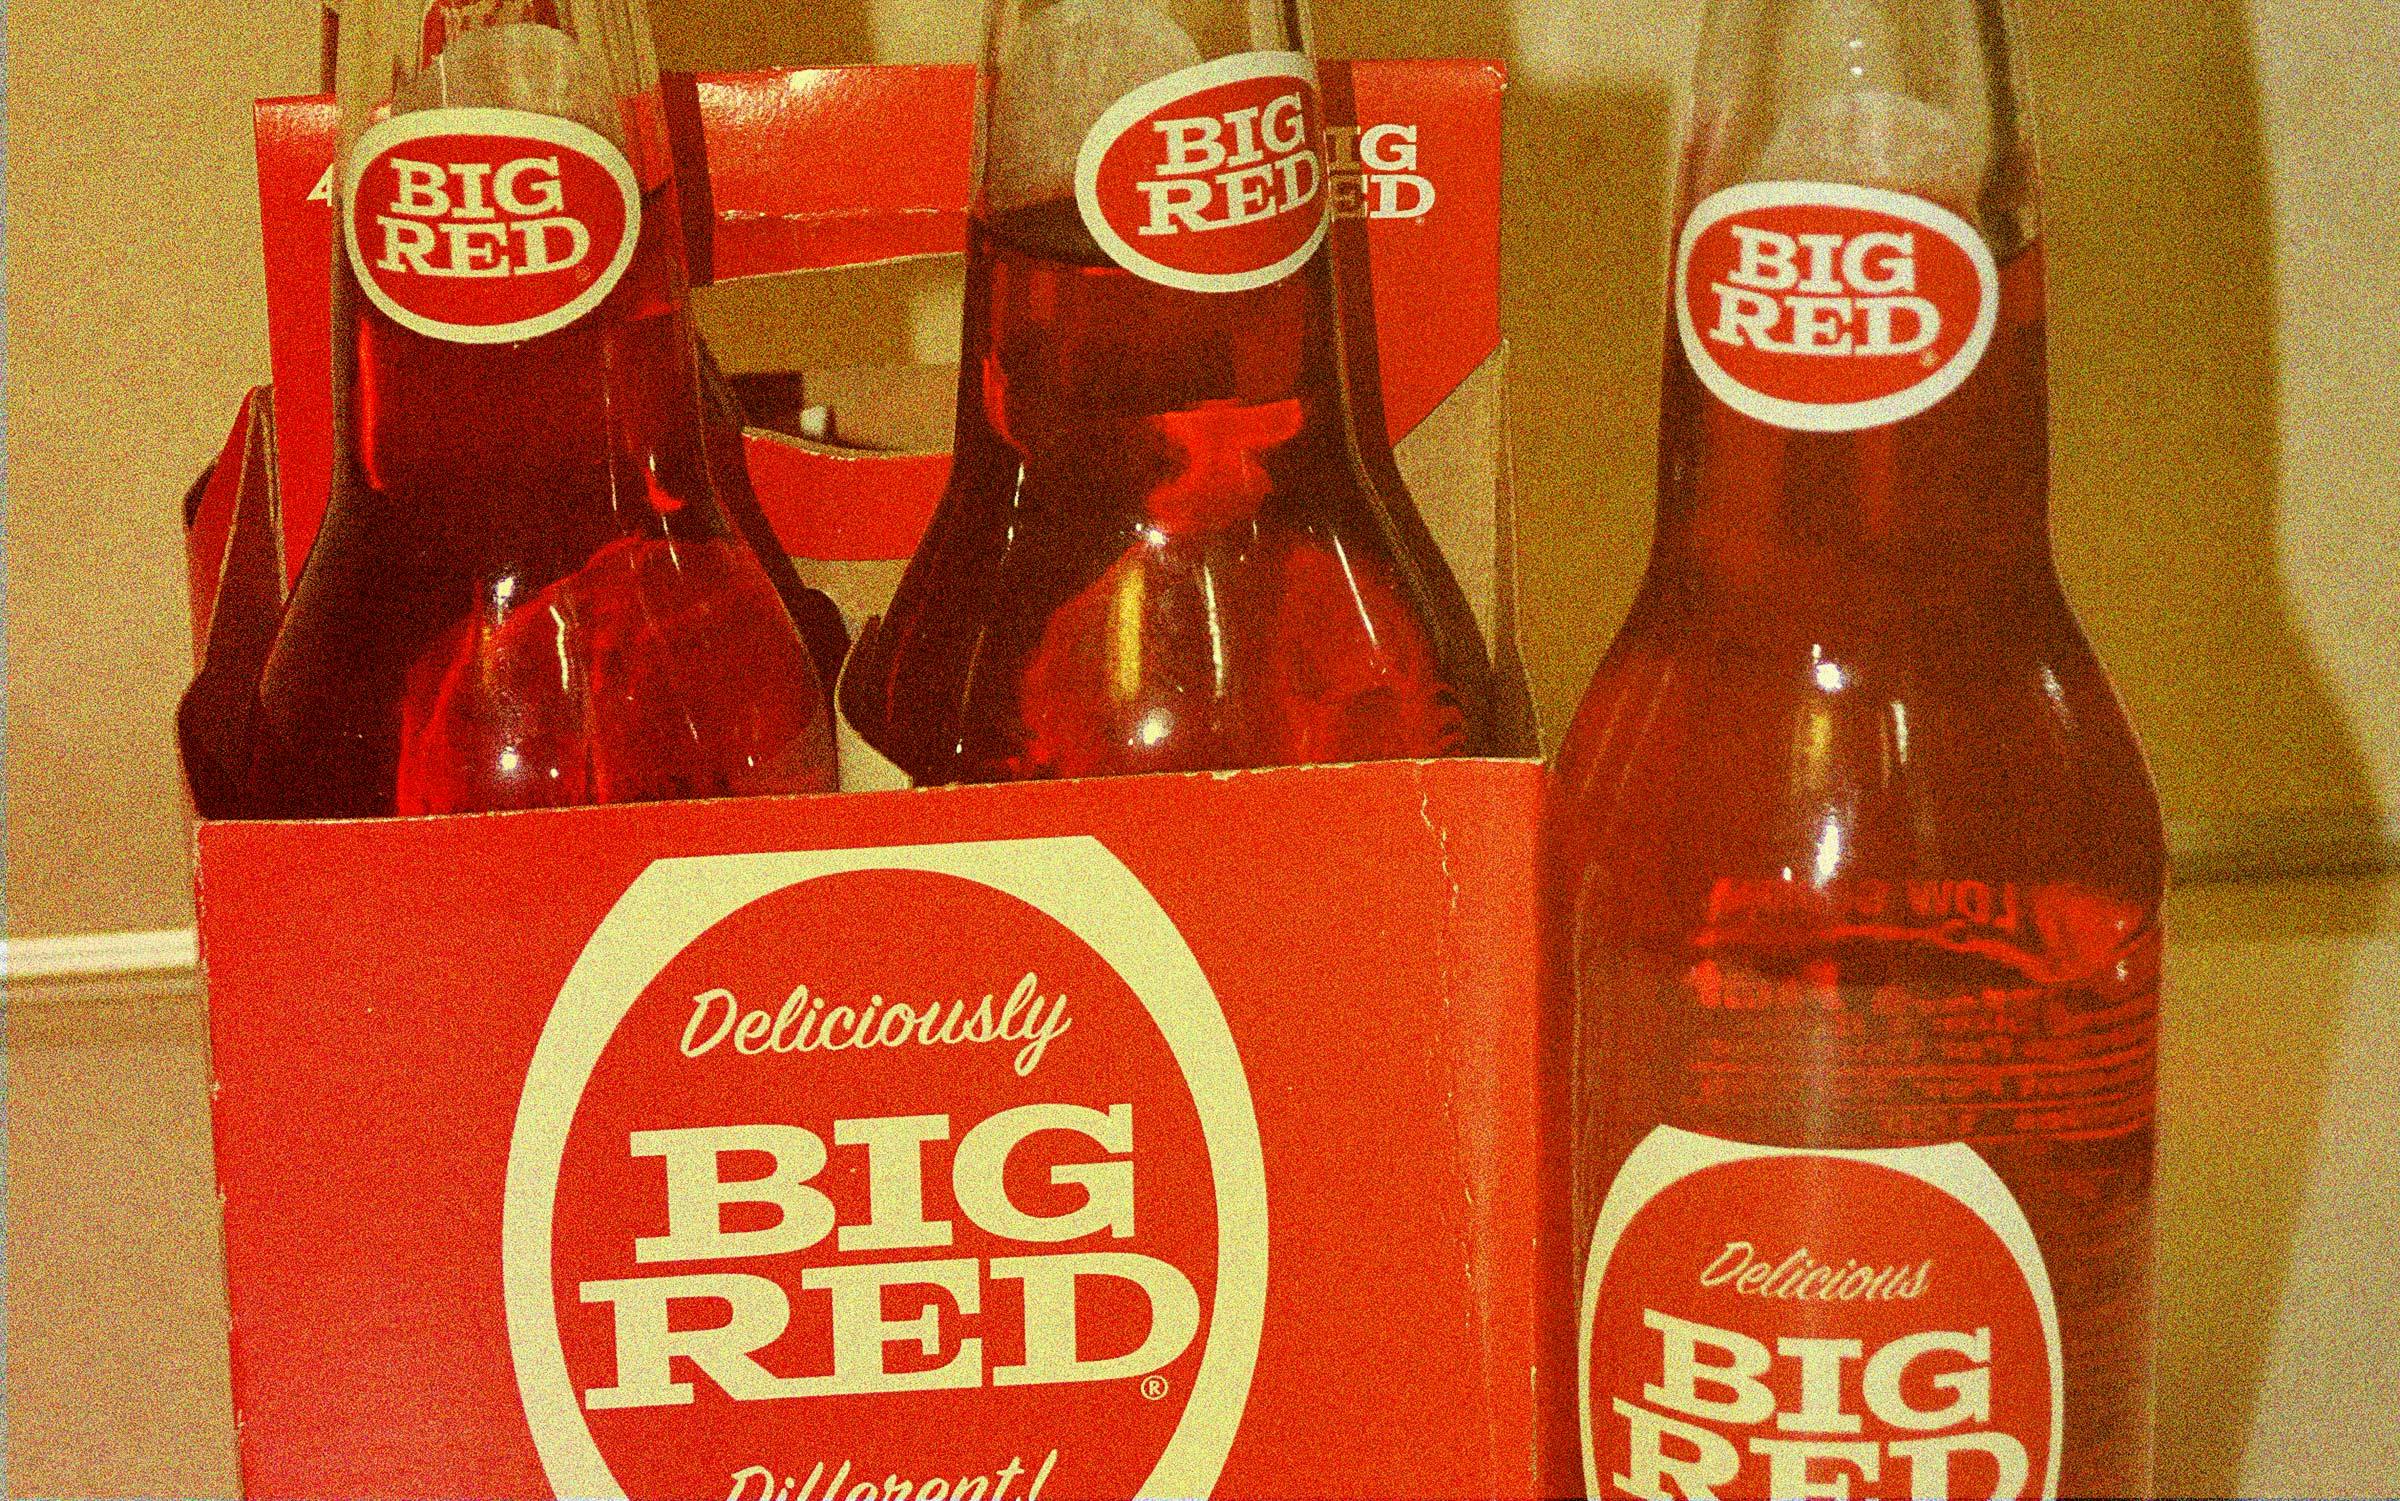 Texas Firsts: A Dr Pepper Loyalist Finally Tries Big Red